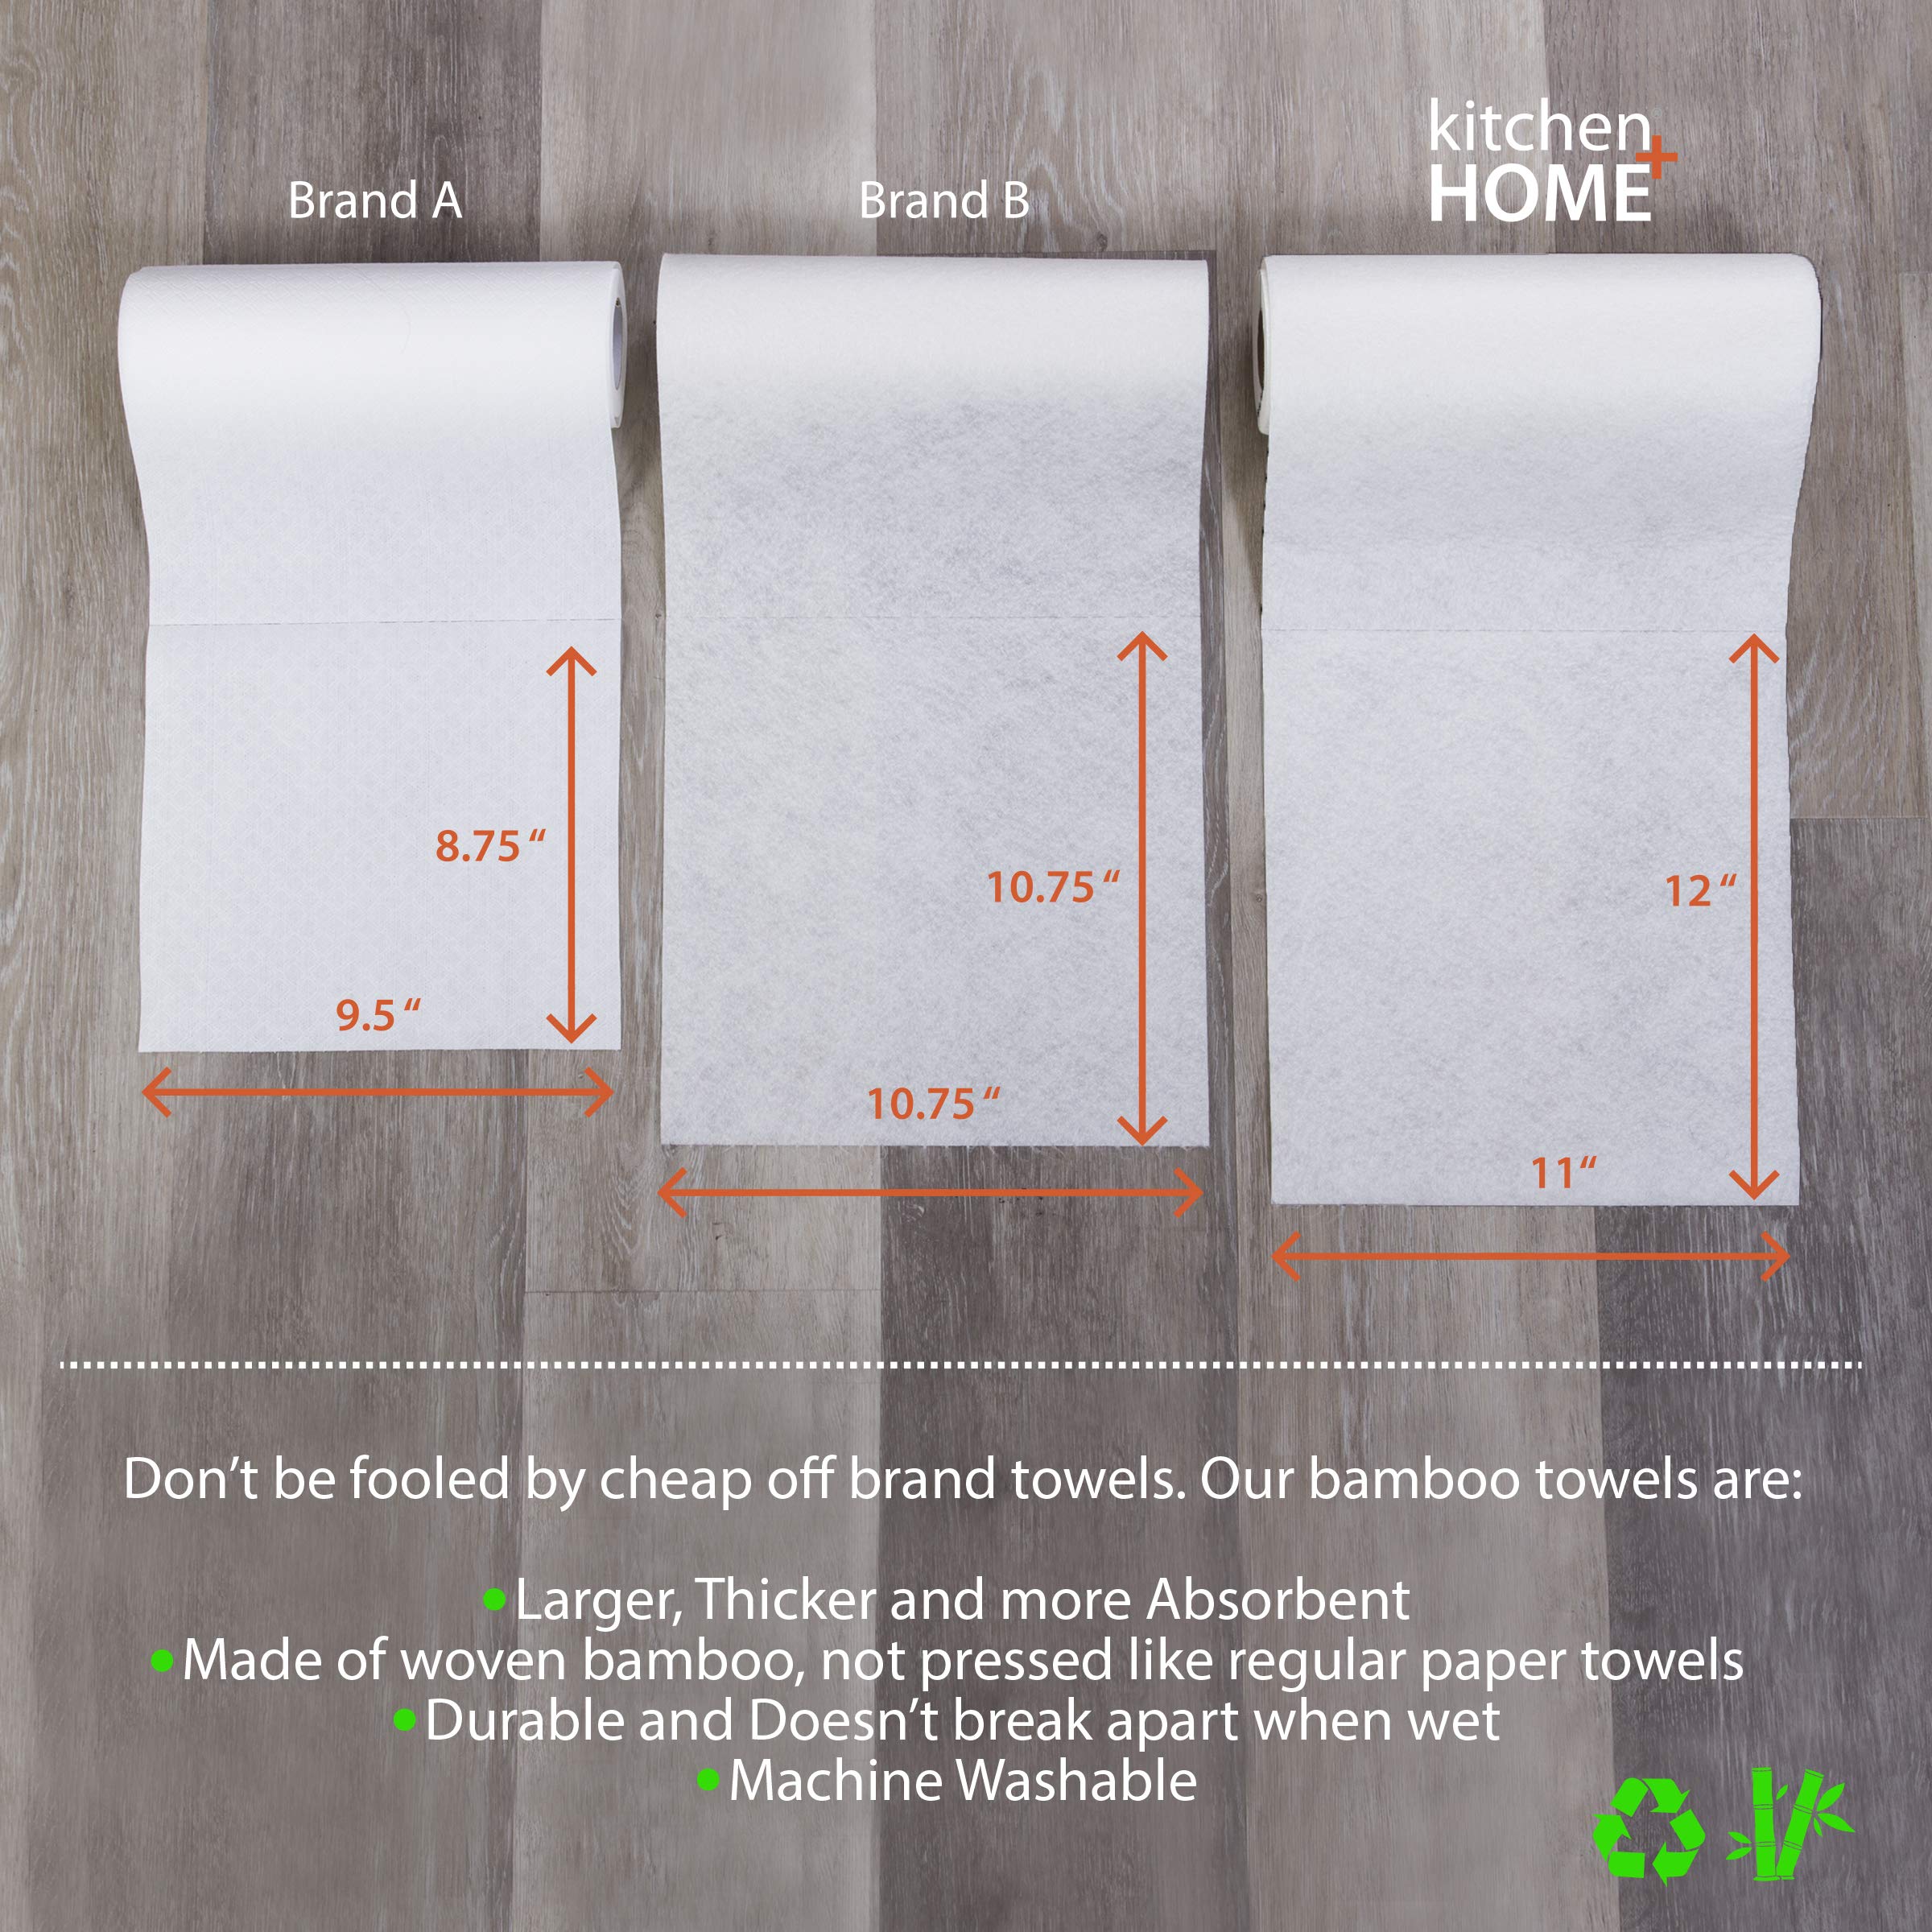 Bamboo Towels - Heavy Duty Machine Washable Reusable Rayon Towels - One roll replaces 6 months of towels! 1 Pack